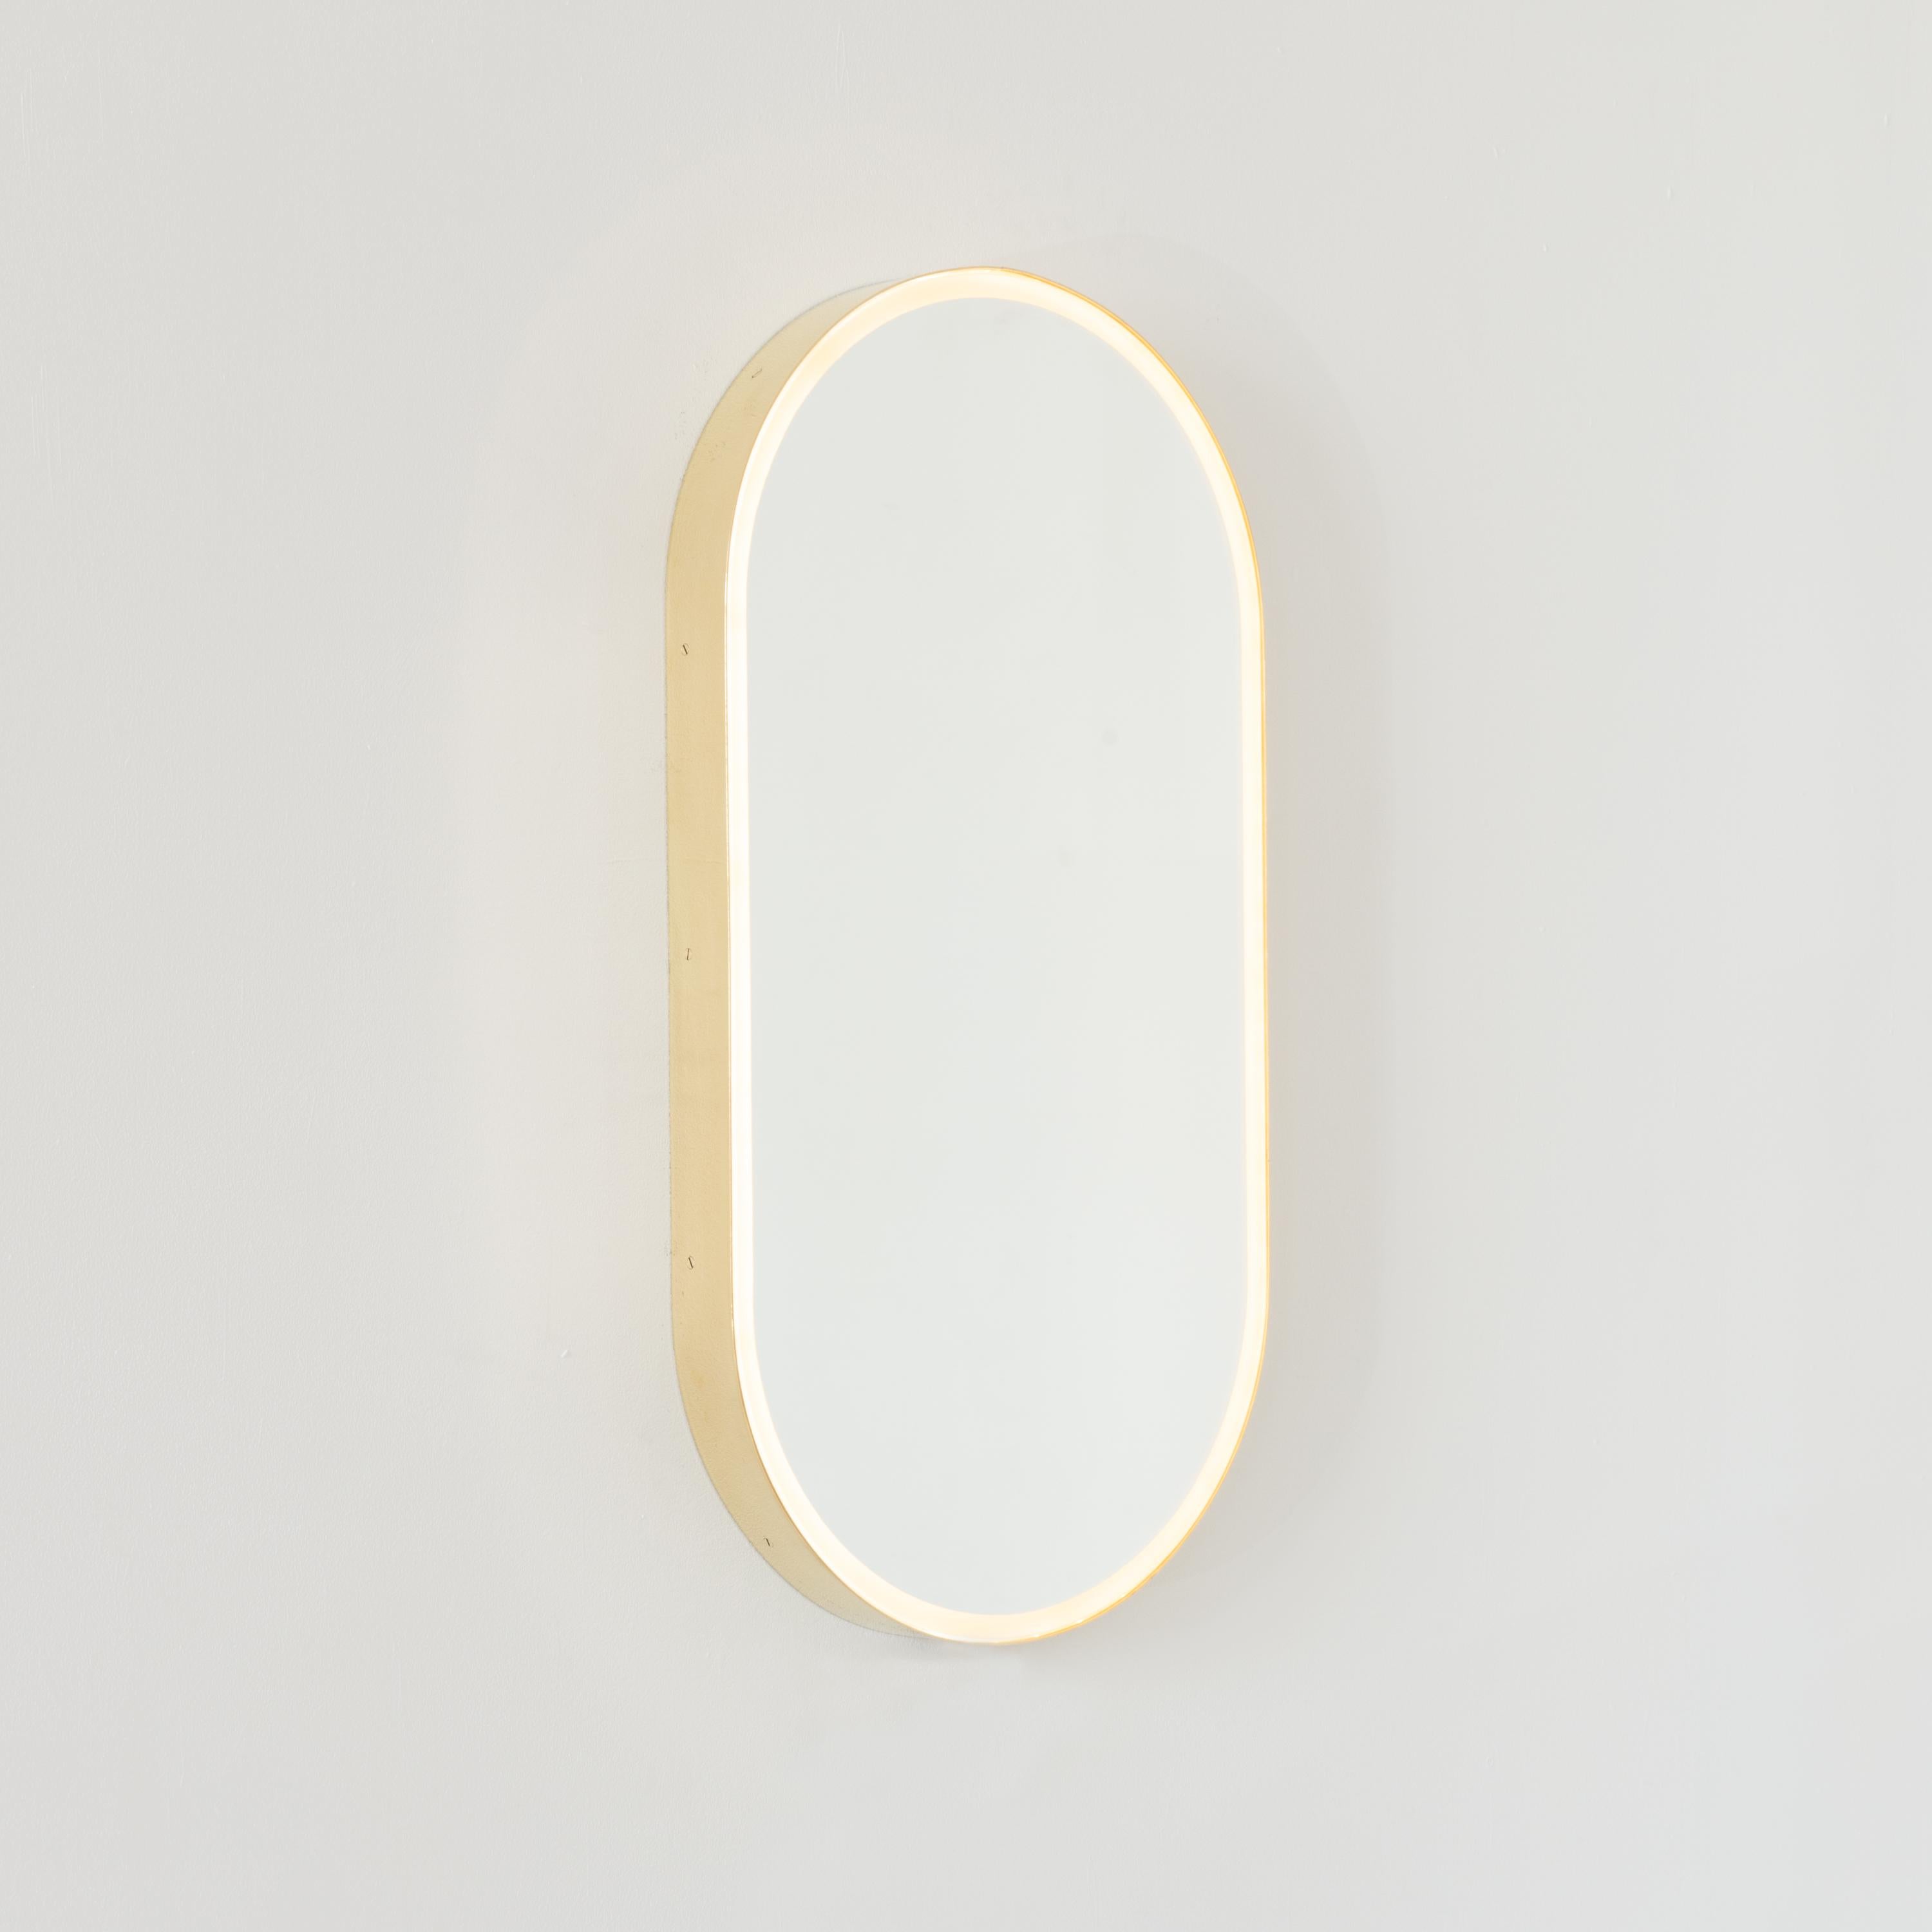 British Capsula Illuminated Contemporary Pill Shaped Mirror with Brass Frame, XL For Sale